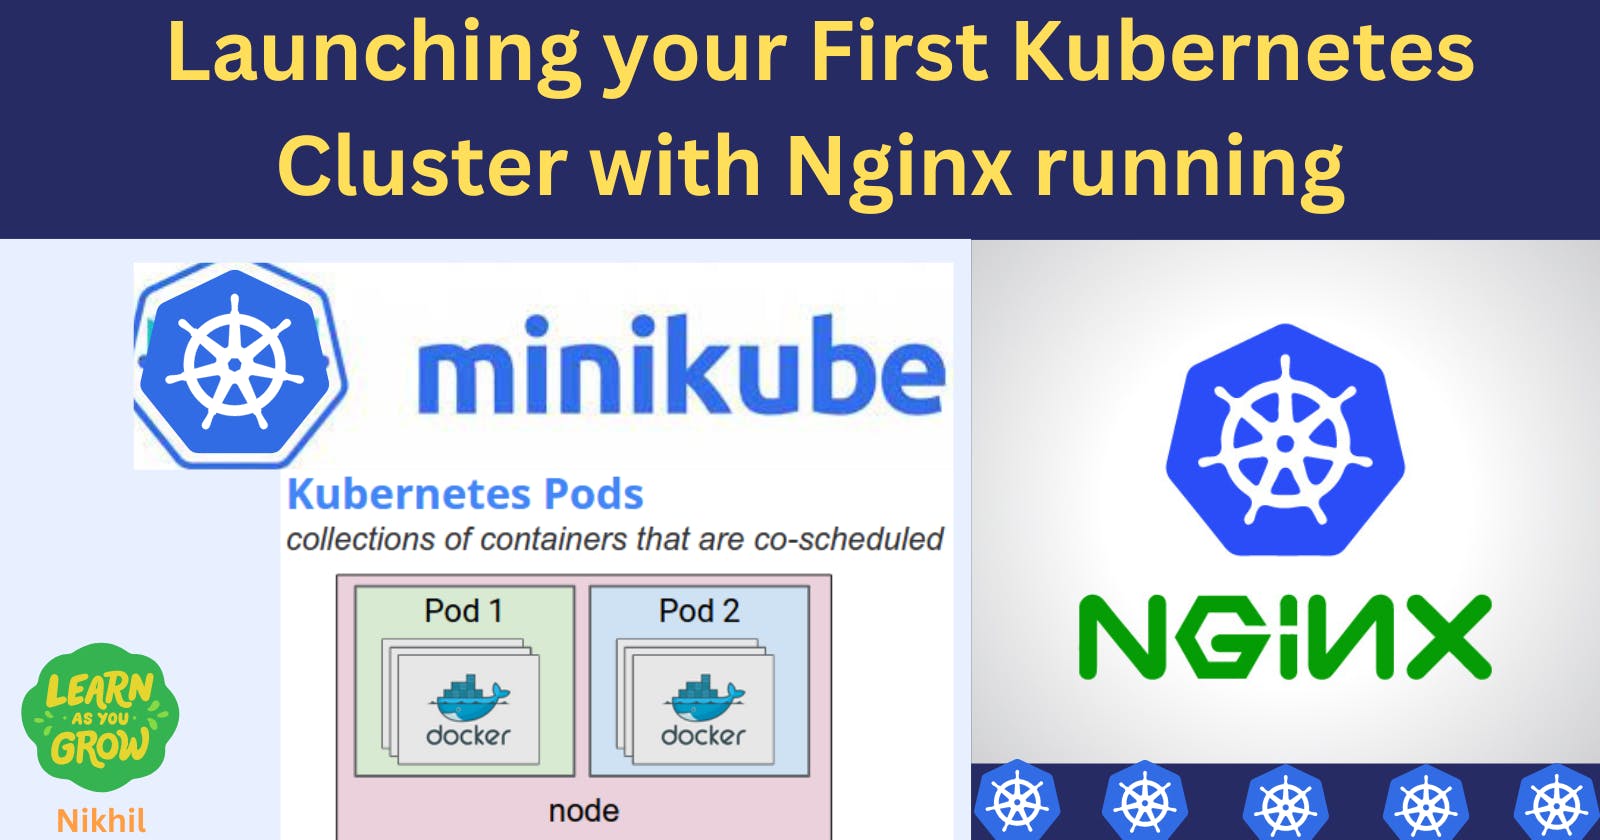 Day: 31 Launching your First Kubernetes Cluster with Nginx running